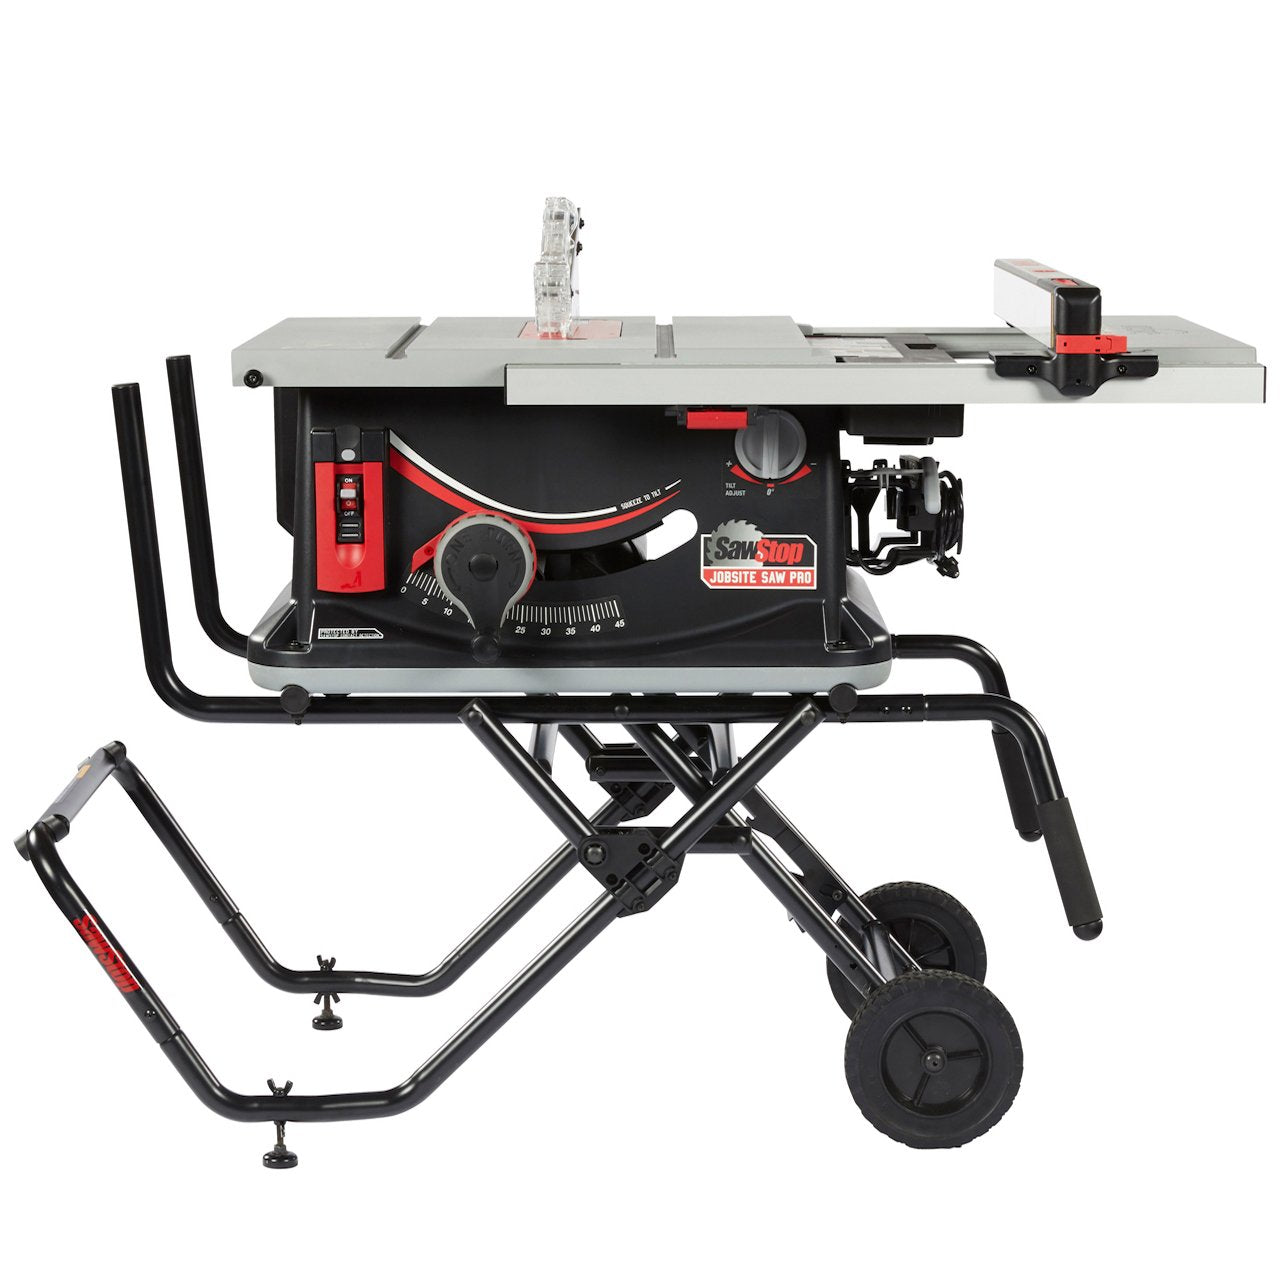 SawStop Jobsite Pro Saw with Mobile Cart - Ultimate Tools